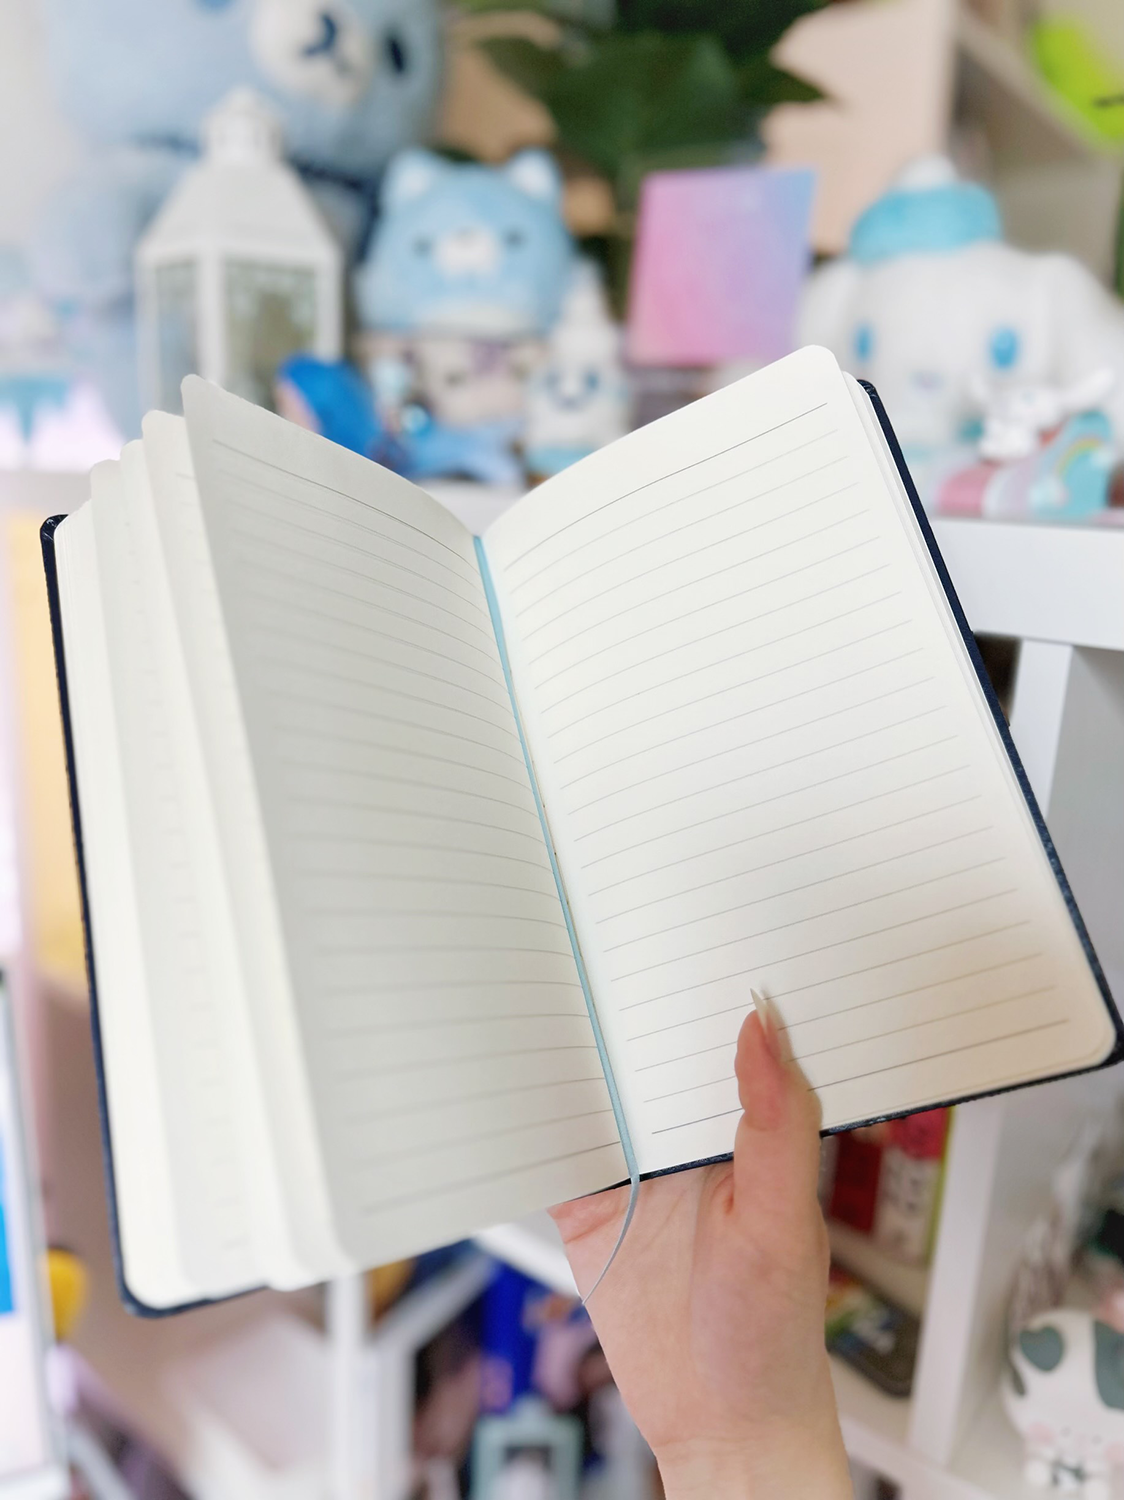 ﻿A high quality leatherette notebook with 192 lined sheets of paper themed around Studio Ghibli